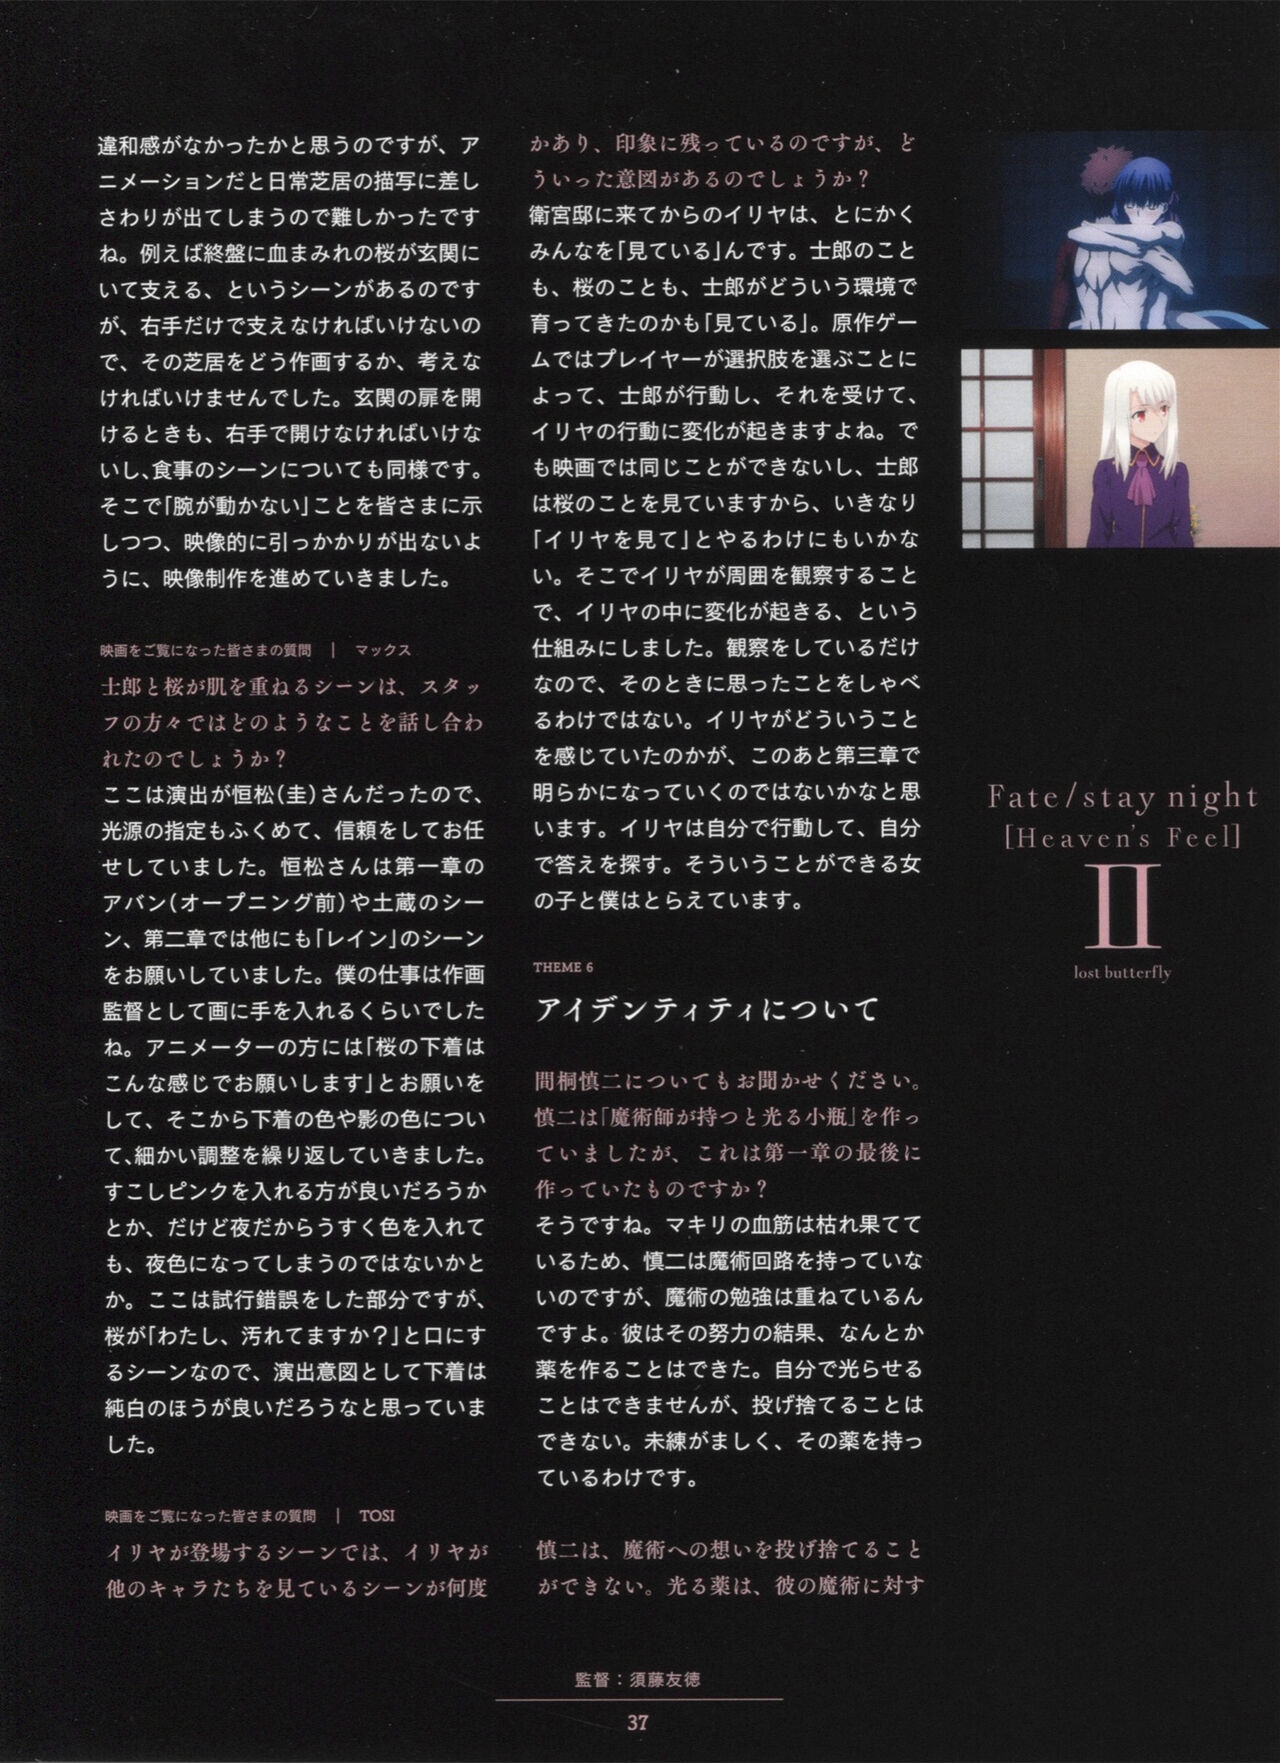 Fate/Stay Night: Heaven's Feel II - Lost Butterfly Animation Material 36